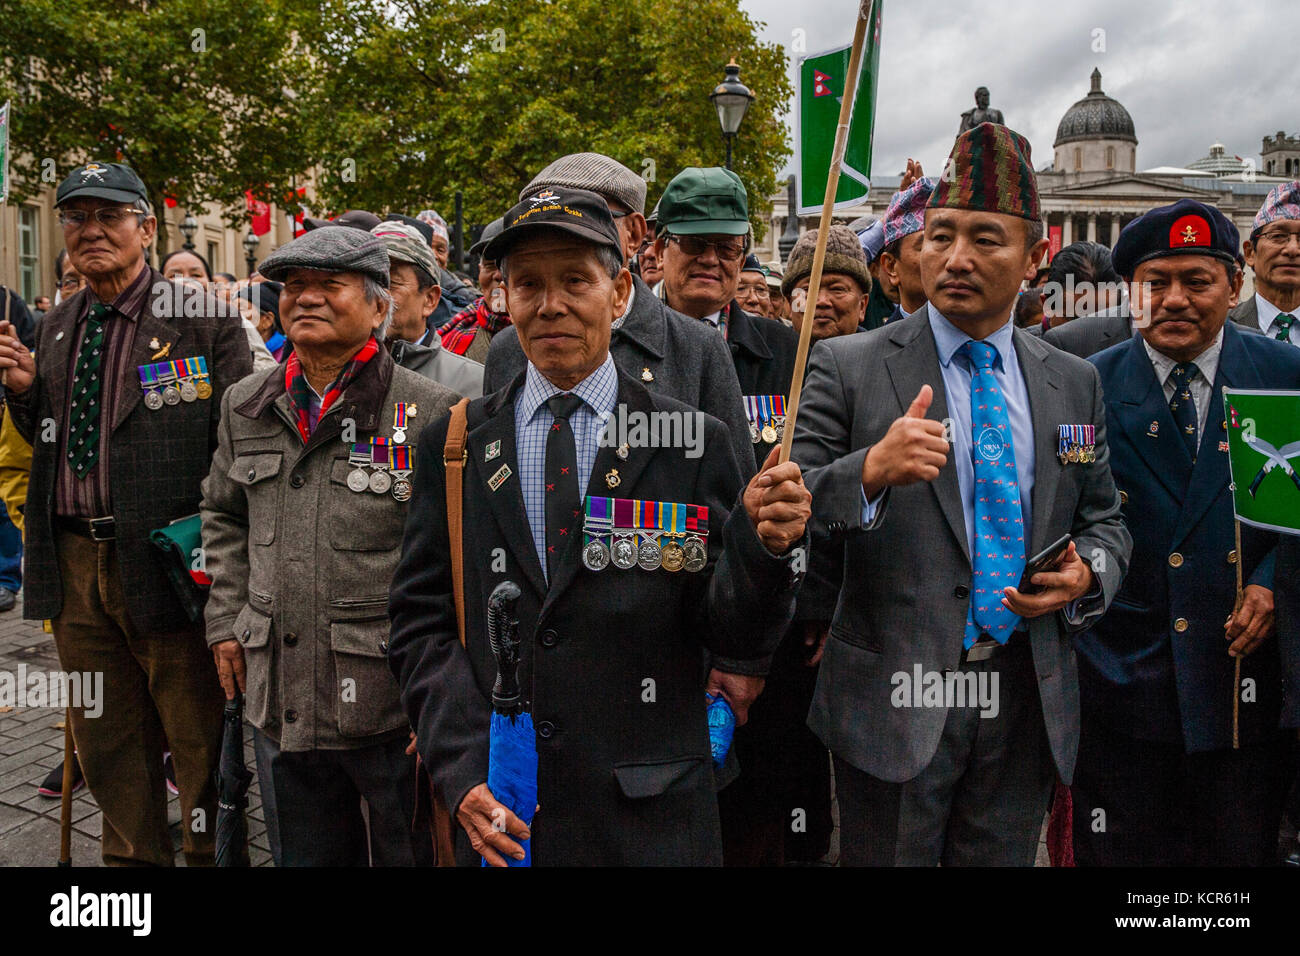 London, UK. 7th October 2017. Ghurkas join football fans from across the Uk marching against extremism under the banner of the FLA (football lads alliance) Credit: Grant Rooney/Alamy Live News Stock Photo